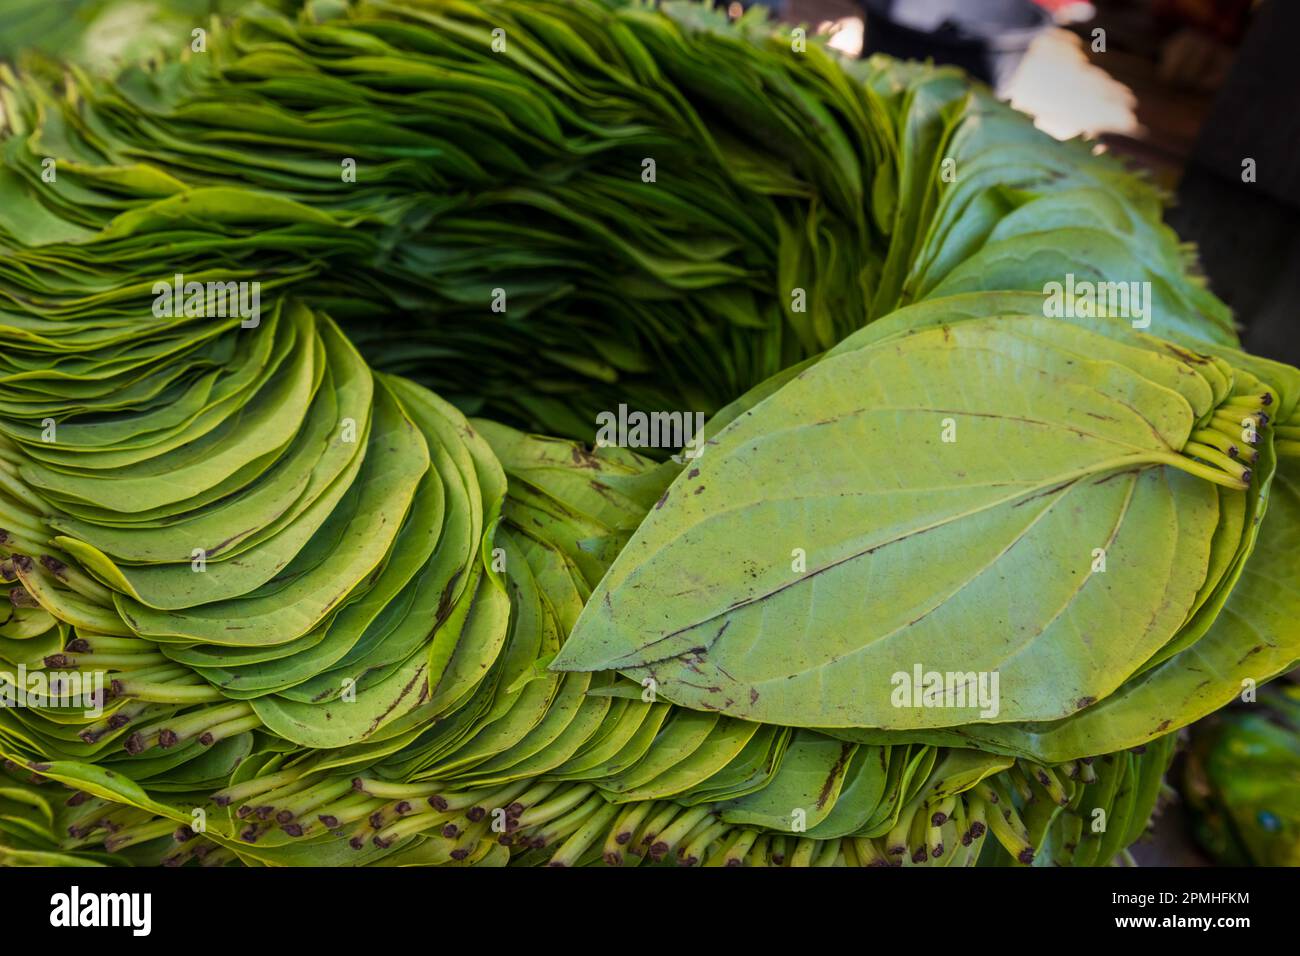 Betel leaves organized in circle that Burmese use for chewing, Inn Thein market, Lake Inle, Shan State, Myanmar (Burma), Asia Stock Photo